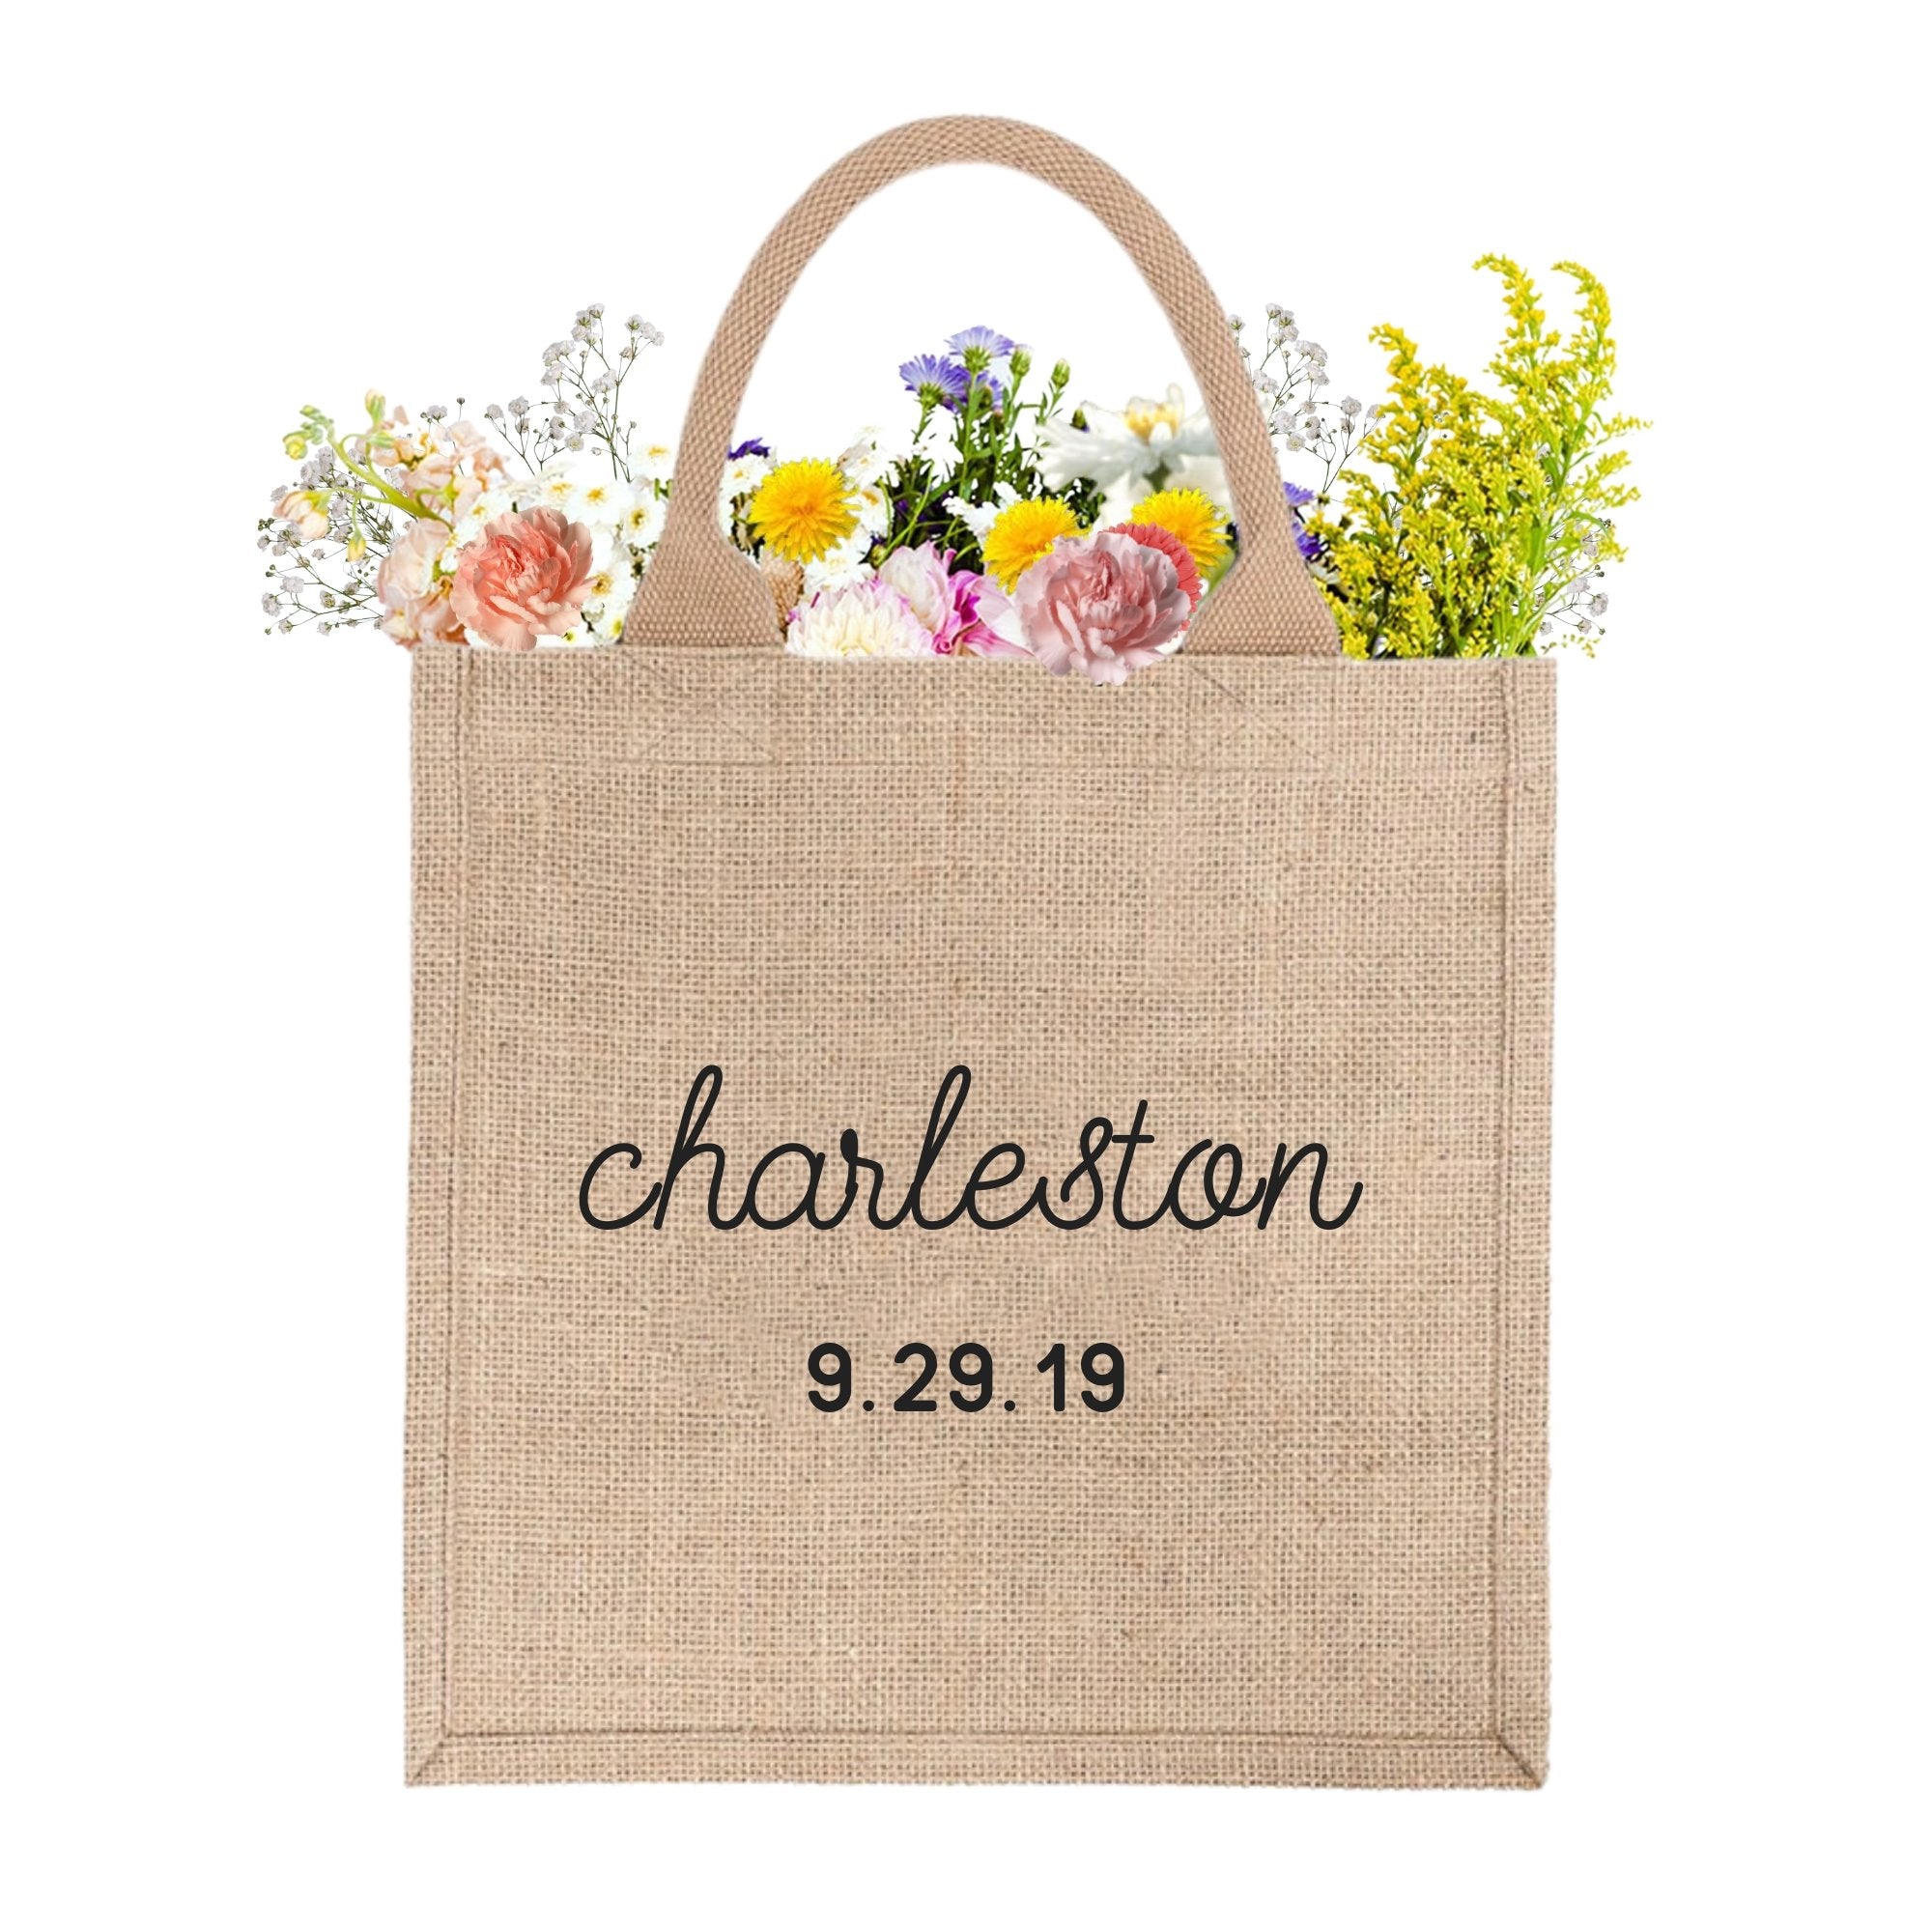 Personalized Welcome Bag with initials & Date - Personalized Brides